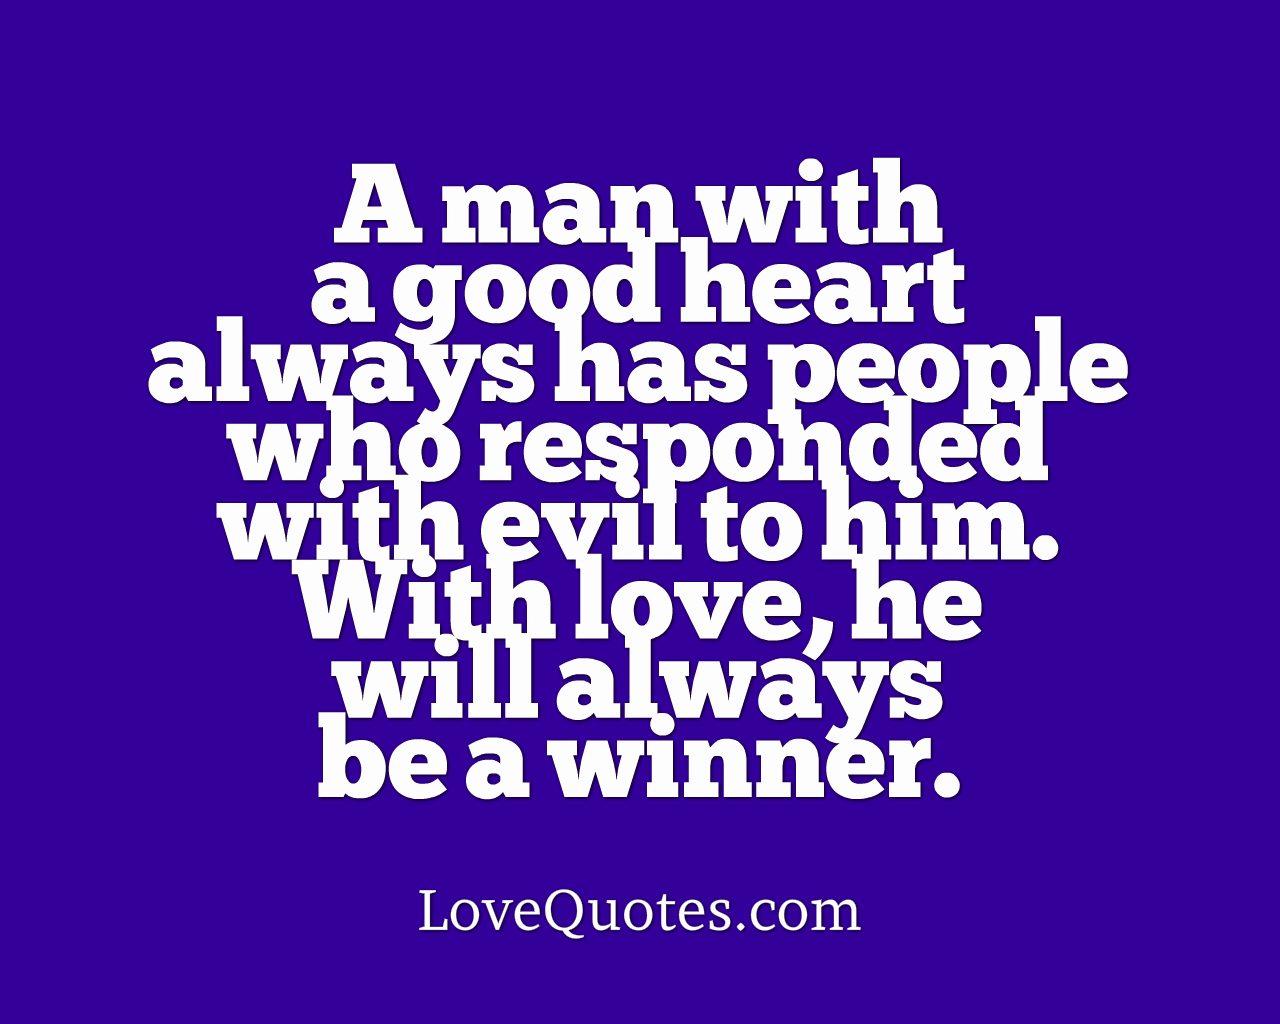 A Man With A Good Heart - Love Quotes